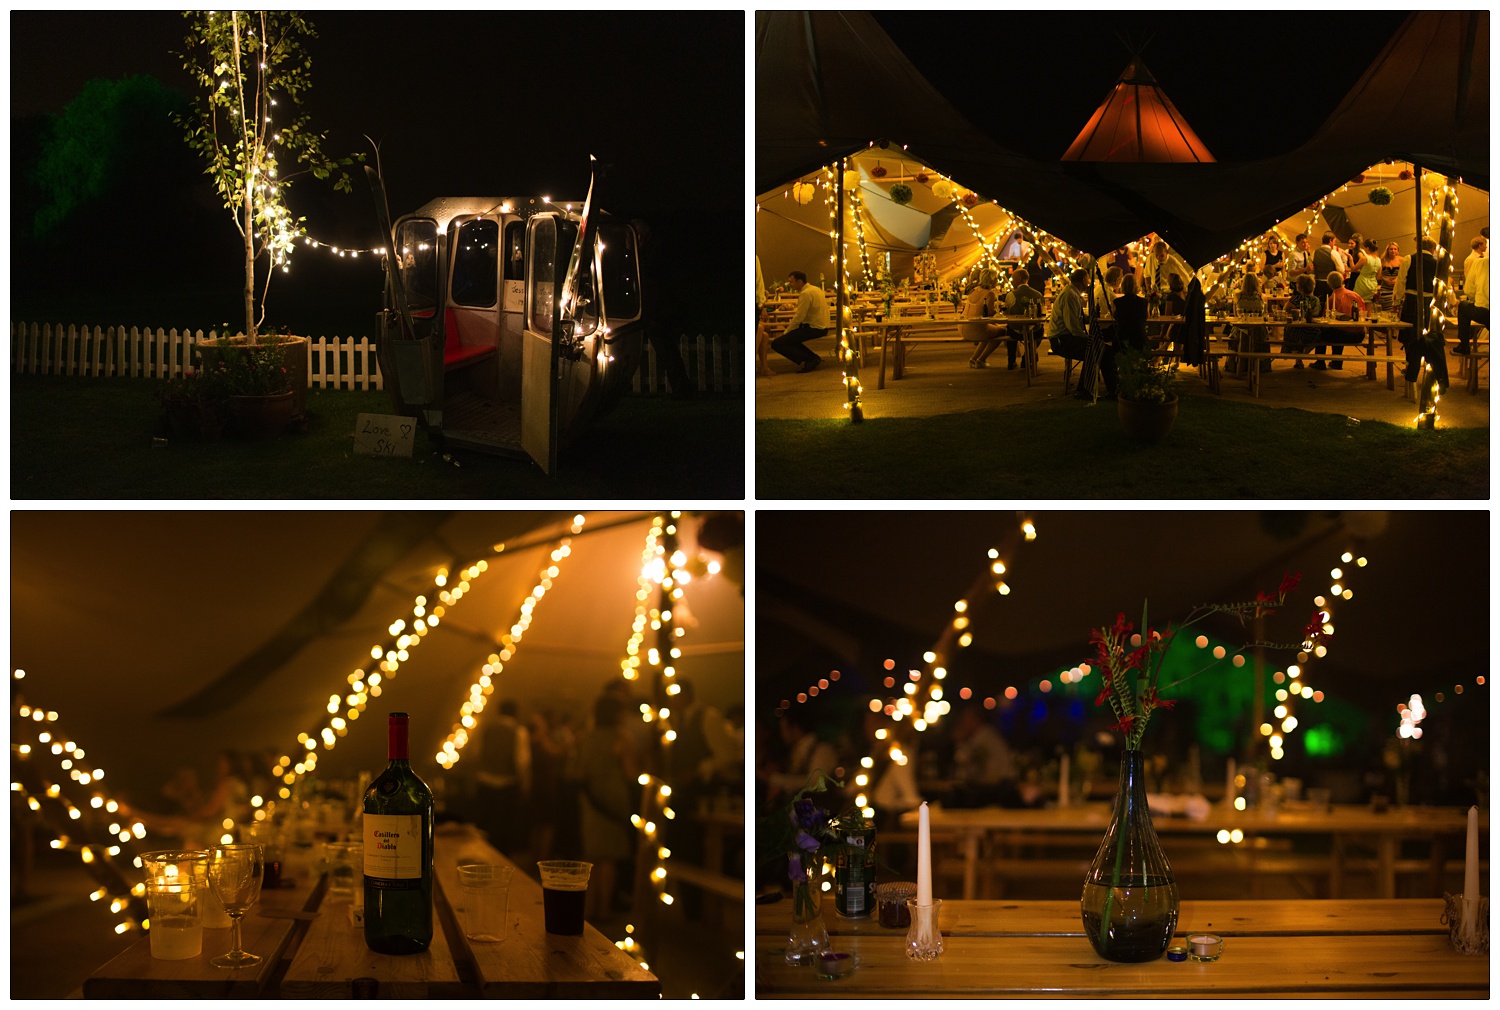 Details of a wedding at night. Wine bottle on a table, a ski cable car, a Tentipi lit up with lights.